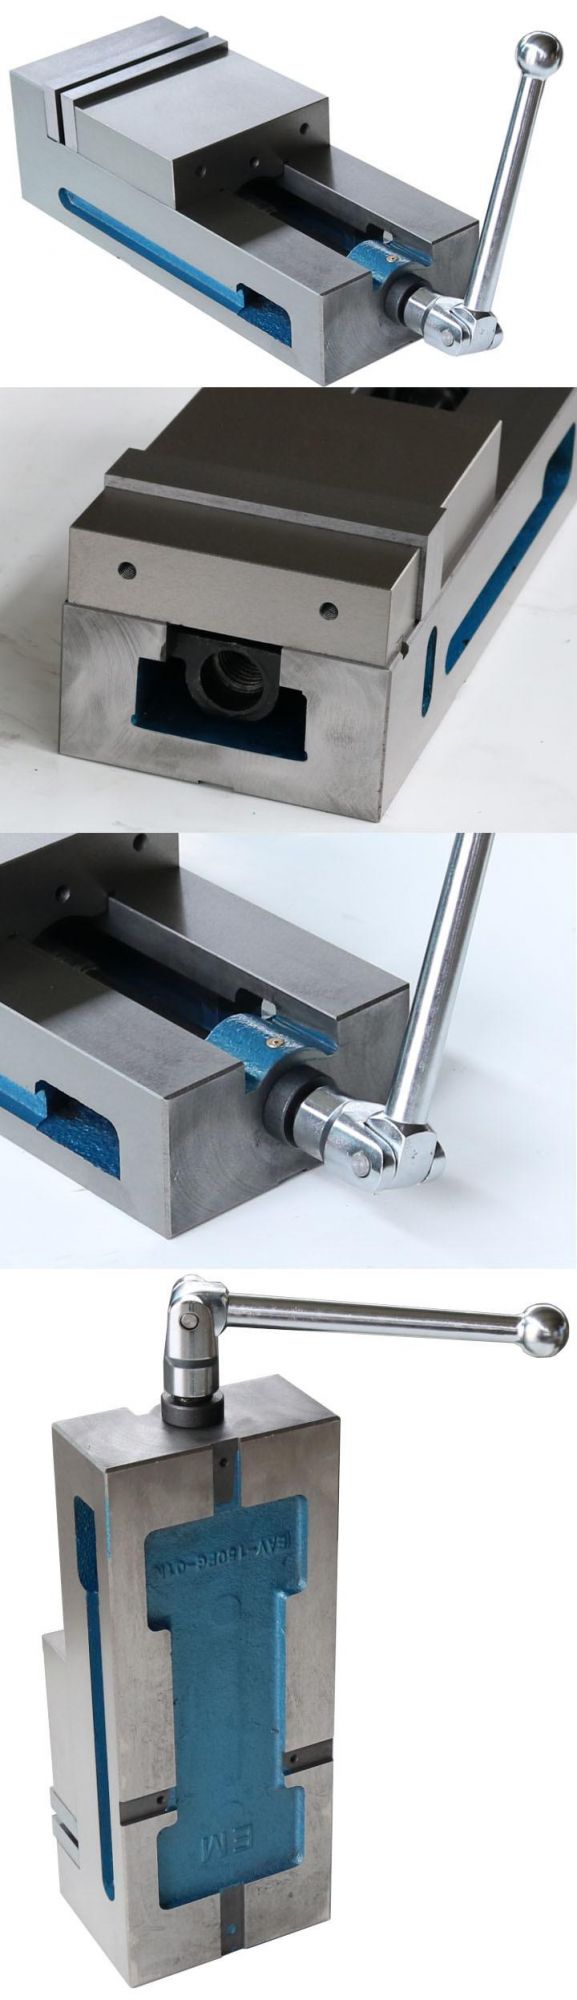 High Quality Milling Vise for Metalworking